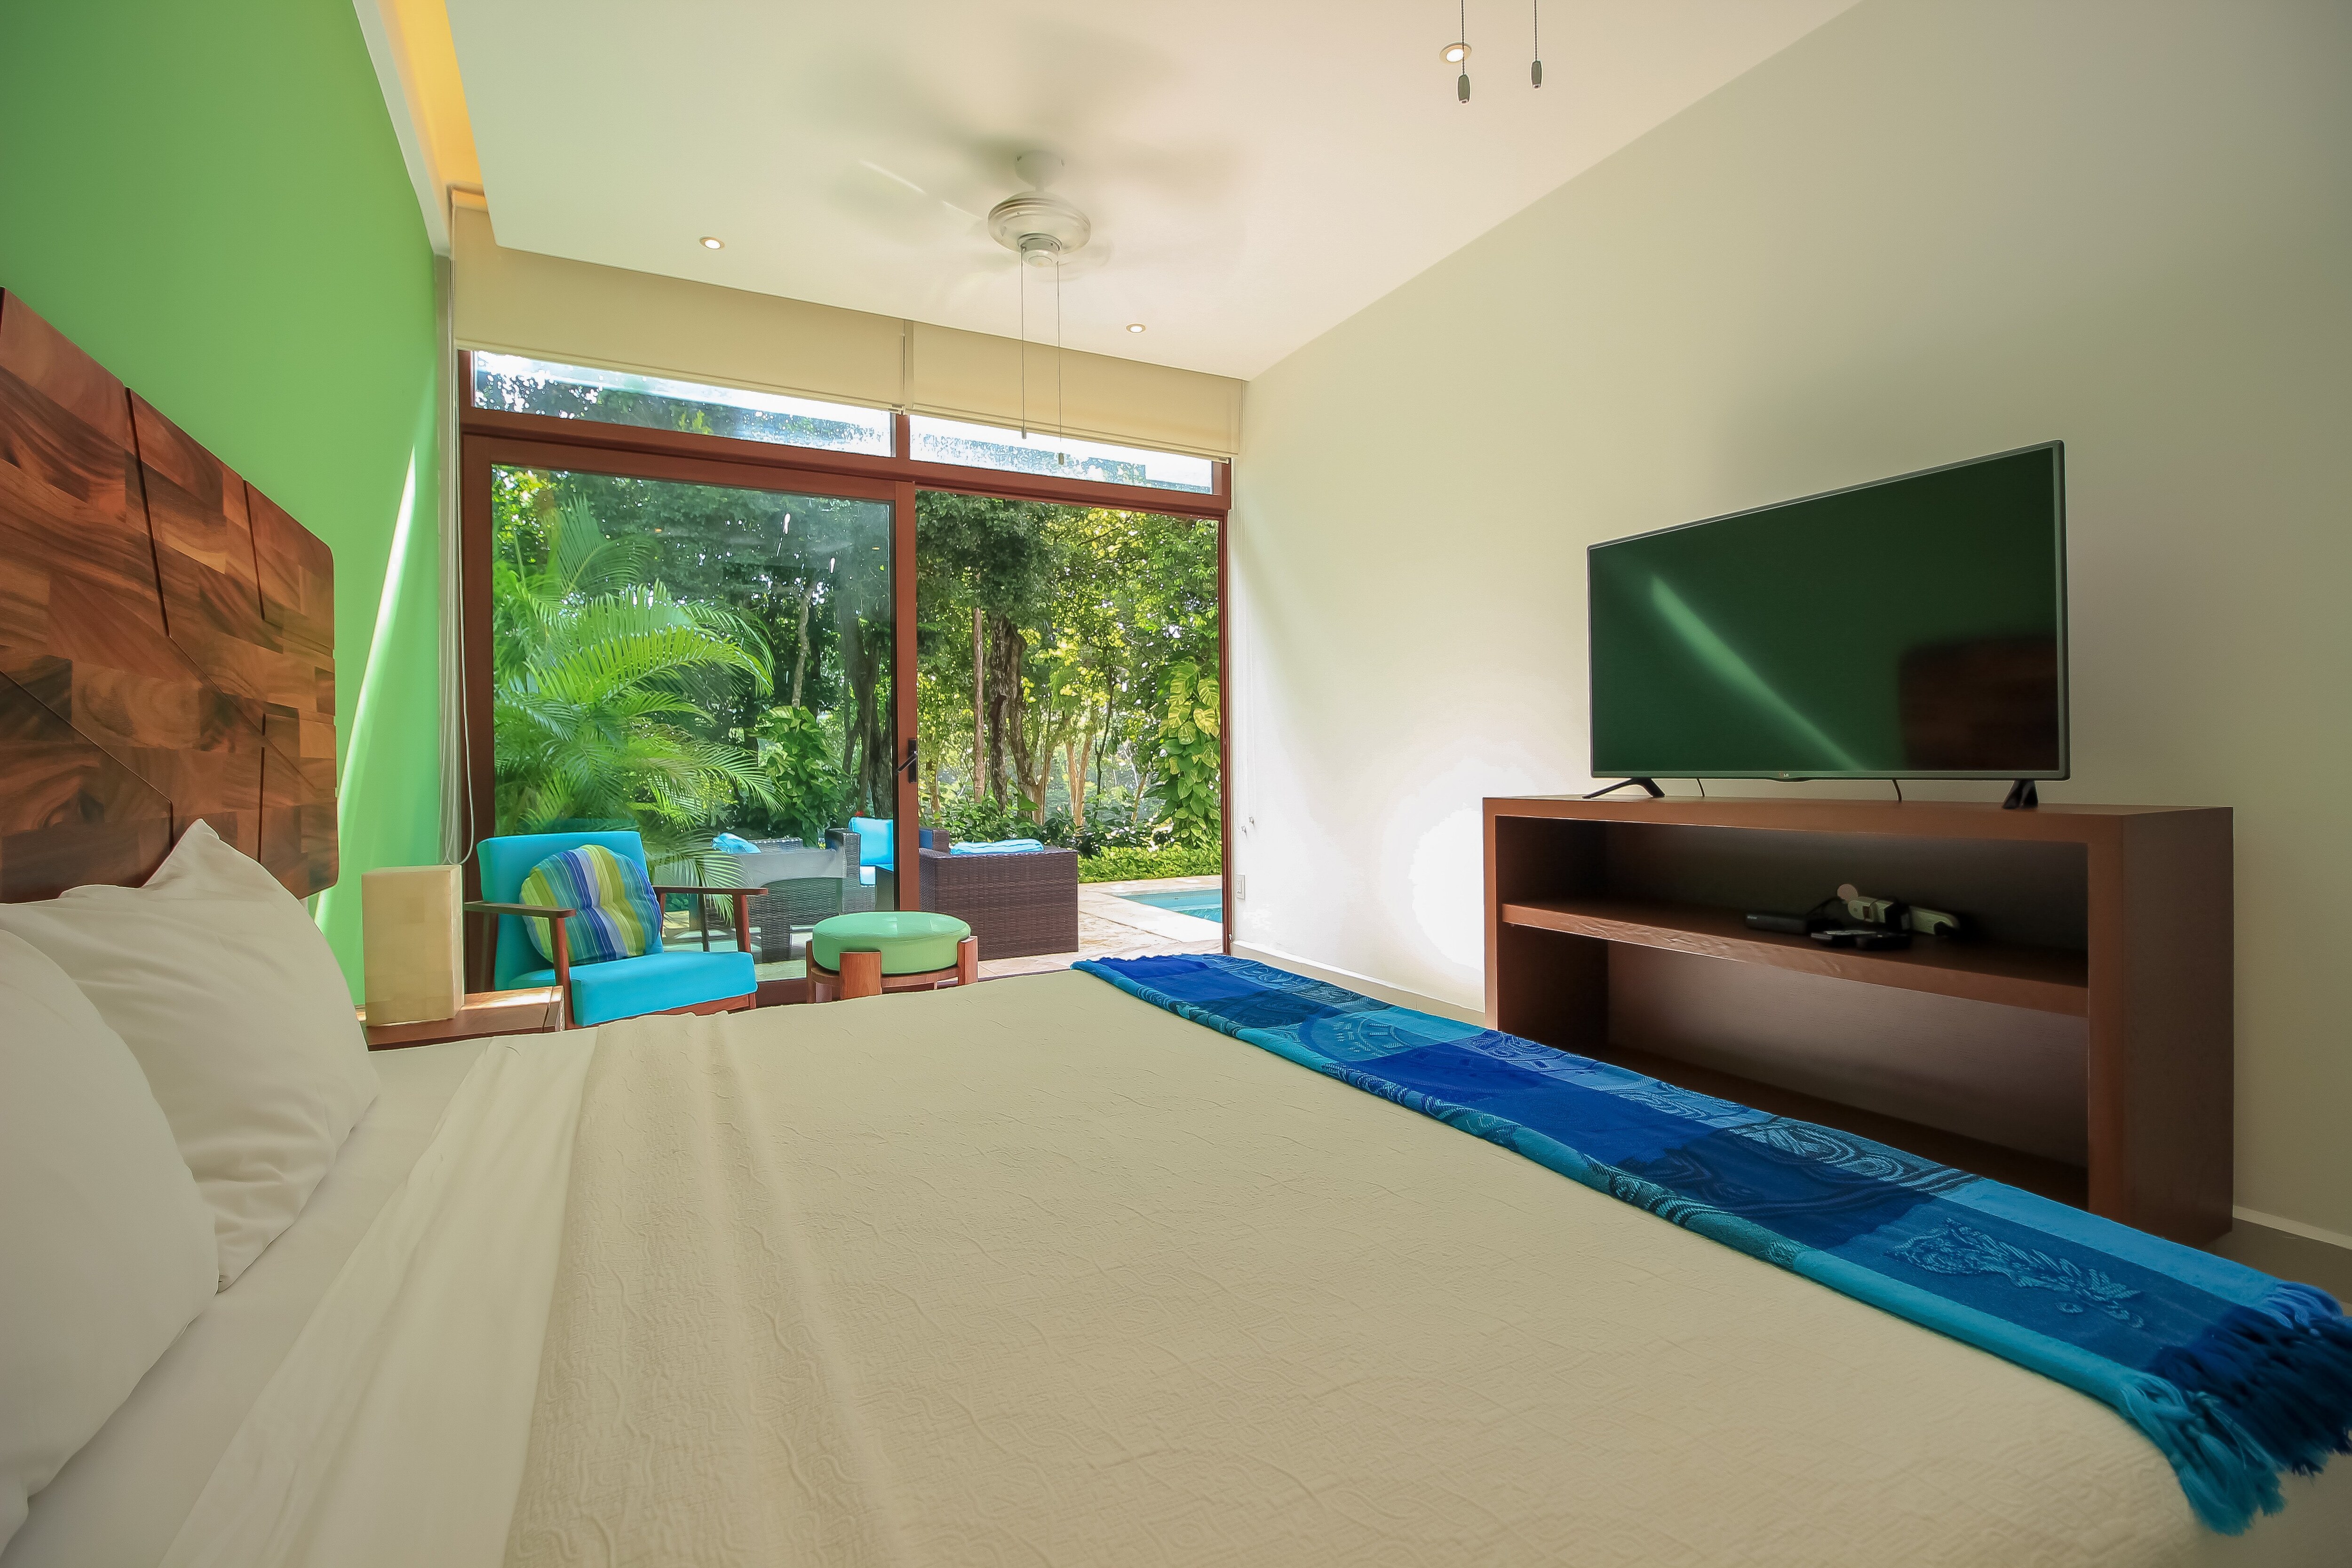 Impressive bedroom with direct access to the pool.